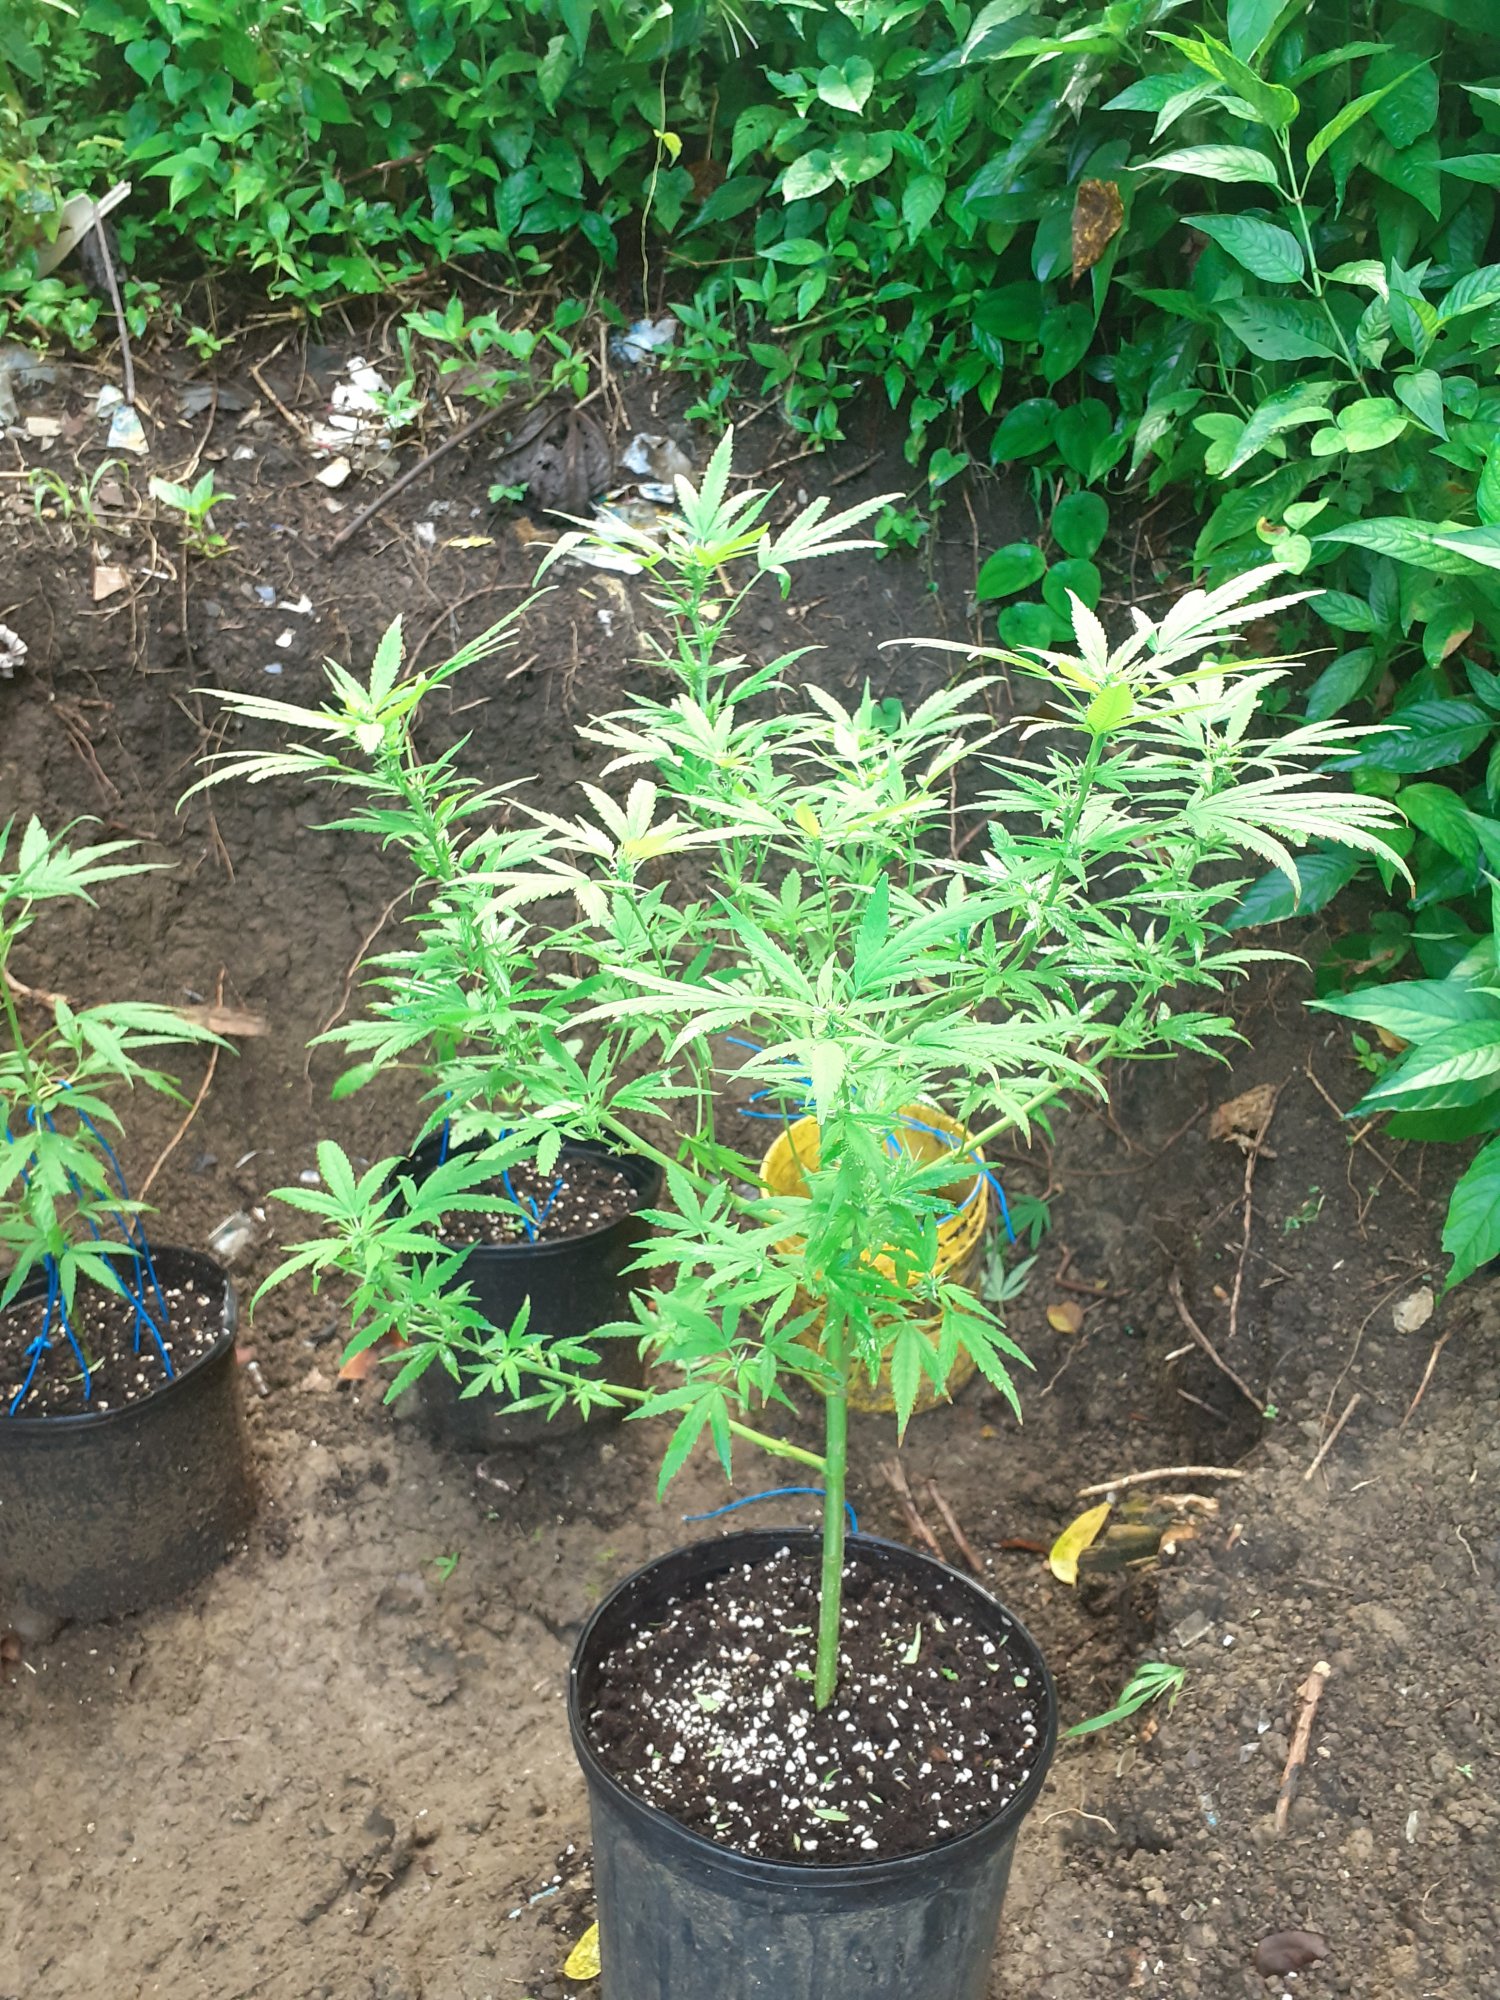 This is my first time growing marijuana 5